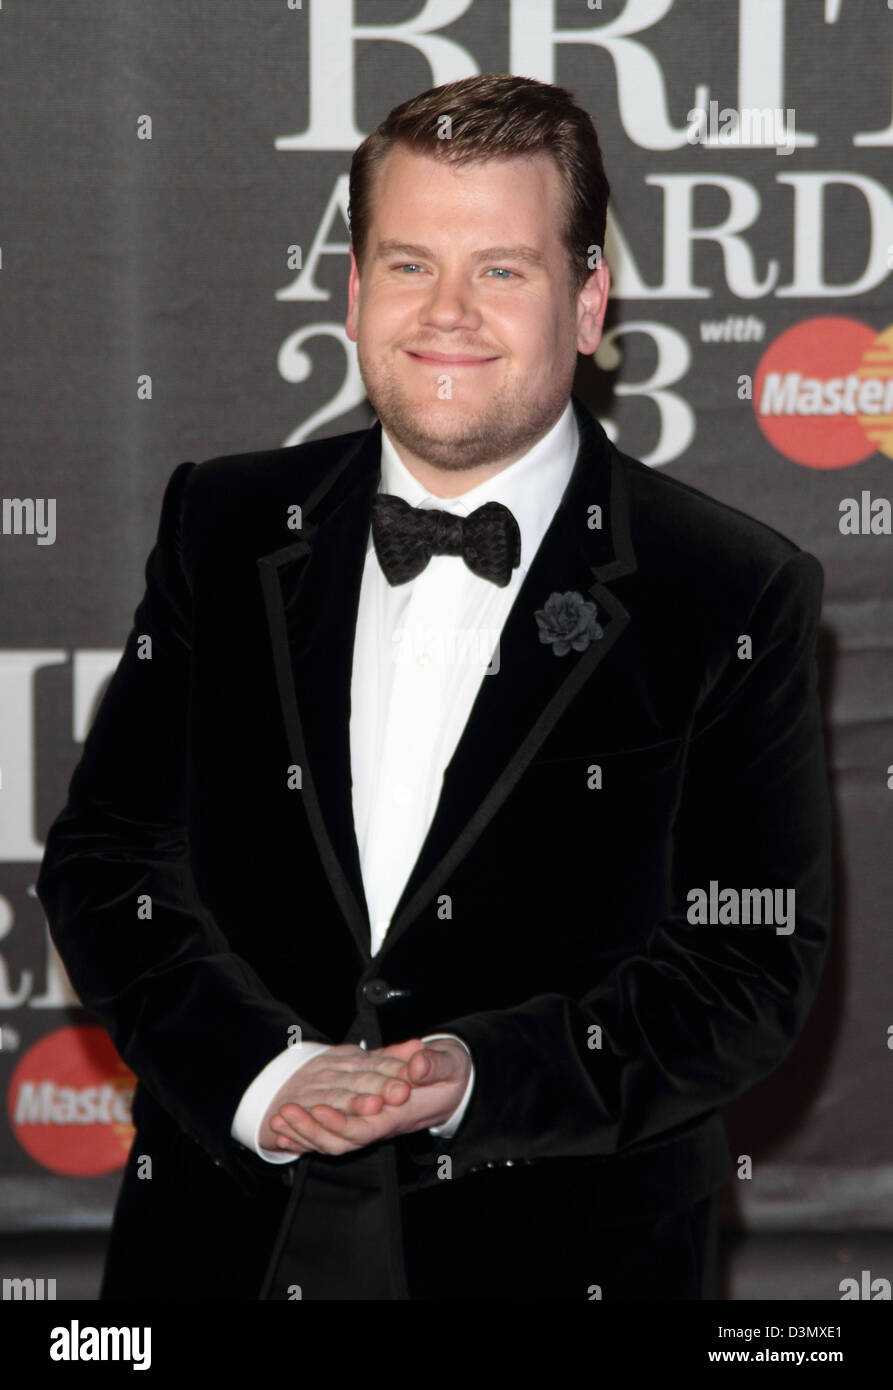 London, UK. 20th February 2013. James Corden at the The 2013 Brit Awards at the O2 Arena, London - February 20th 2013  Photo by Keith Mayhew/ Alamy Live News Stock Photo